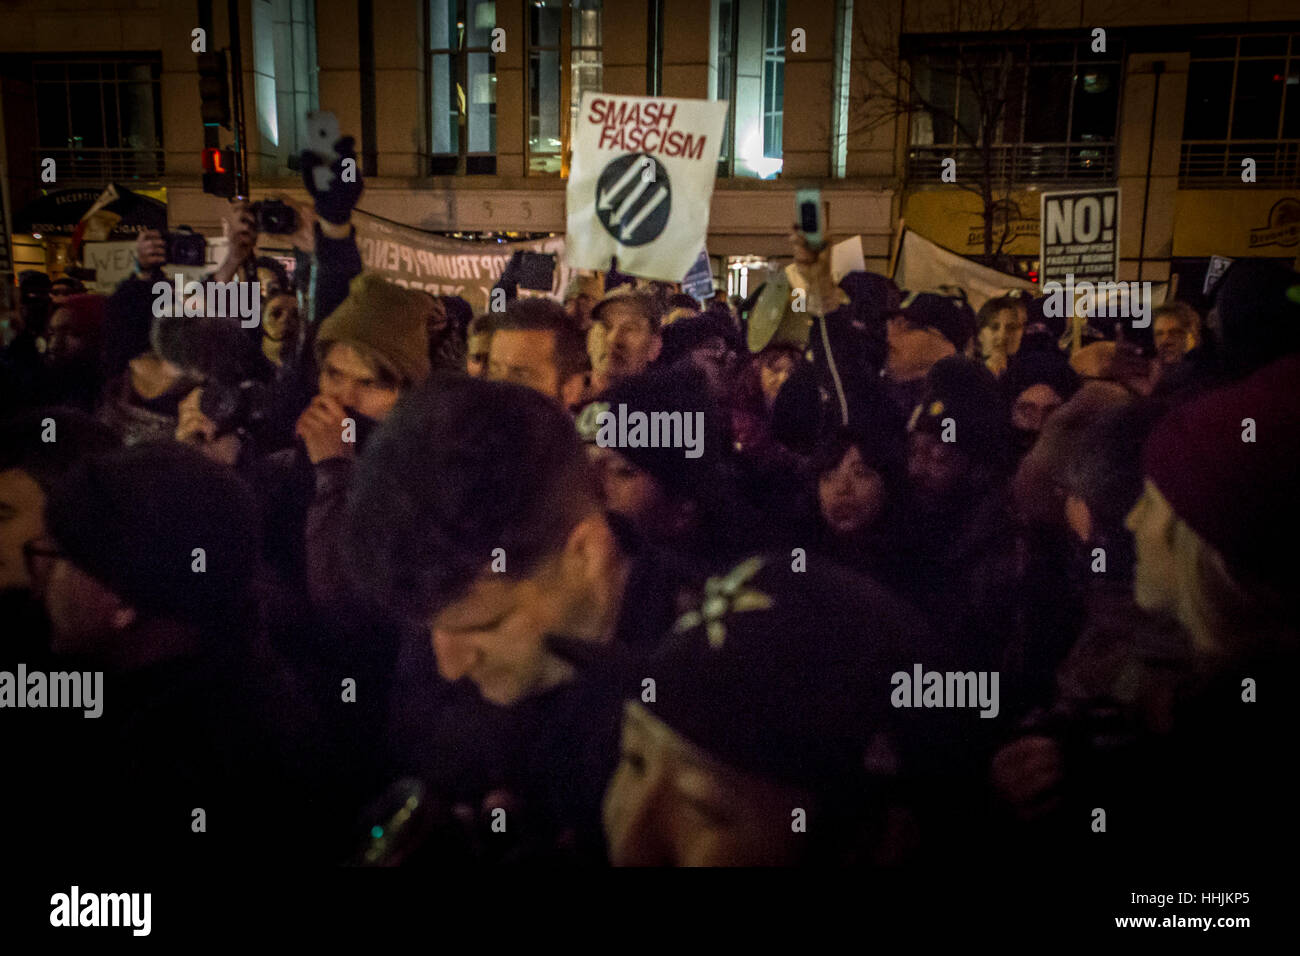 Washington Dc, United States. 19th Jan, 2017. On the eve before Donald Trump is sworn in as the 45th President of the United States, in a pre-inauguration protest on January 19, 2017, hundreds of activists surrounded the Alt-Right 'Deploraball,' which was taking place inside the National Press Club in Washington, DC Credit: Michael Nigro/Pacific Press/Alamy Live News Stock Photo